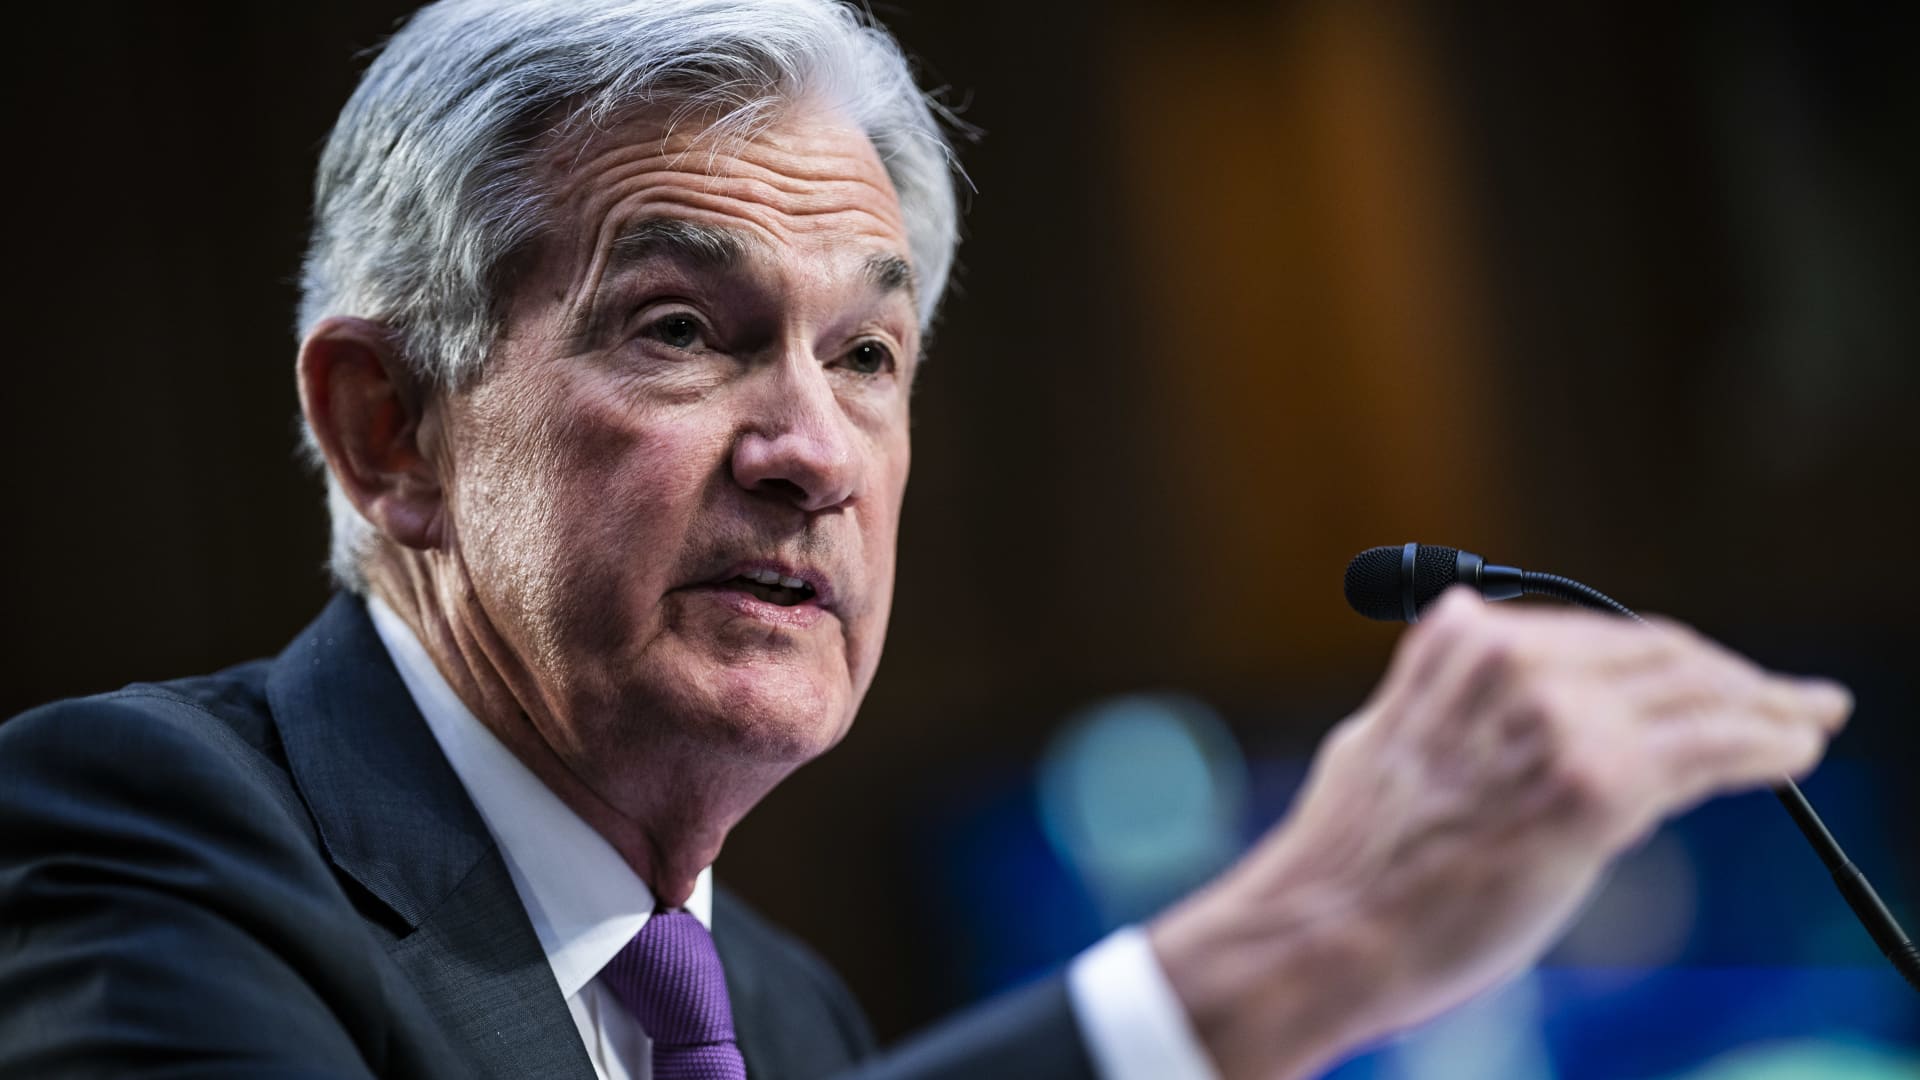 Watch Fed Chair Jerome Powell speak live in second day of Capitol Hill testimony